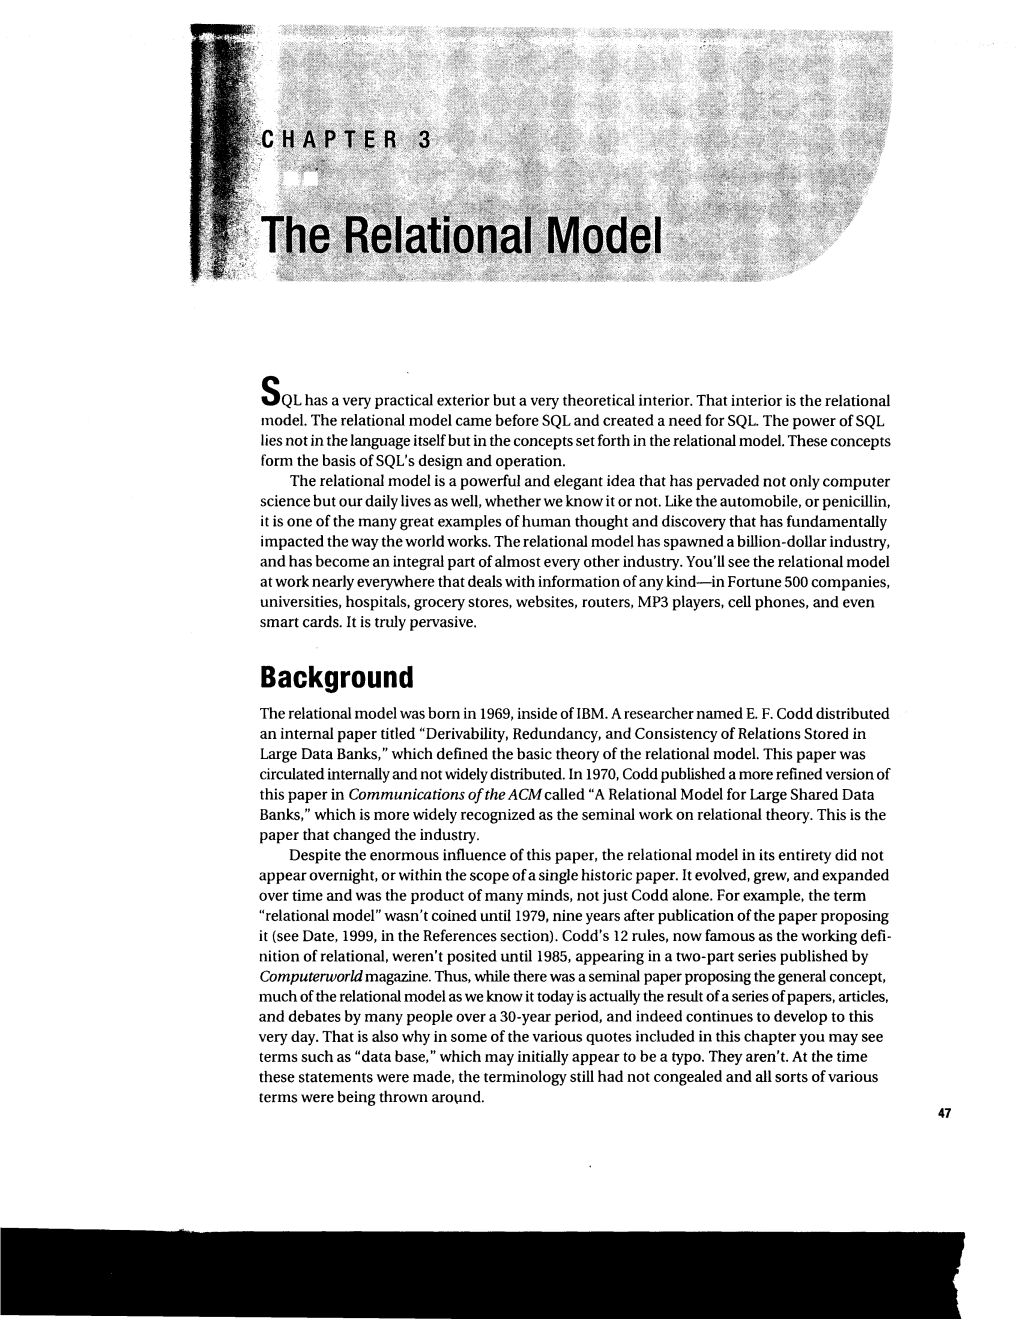 The Relational Model Came Before Sqland Created a Need for SQL.The Power of SQL Liesnot in the Languageitself but in the Conceptsset Forth in the Relationalmodel